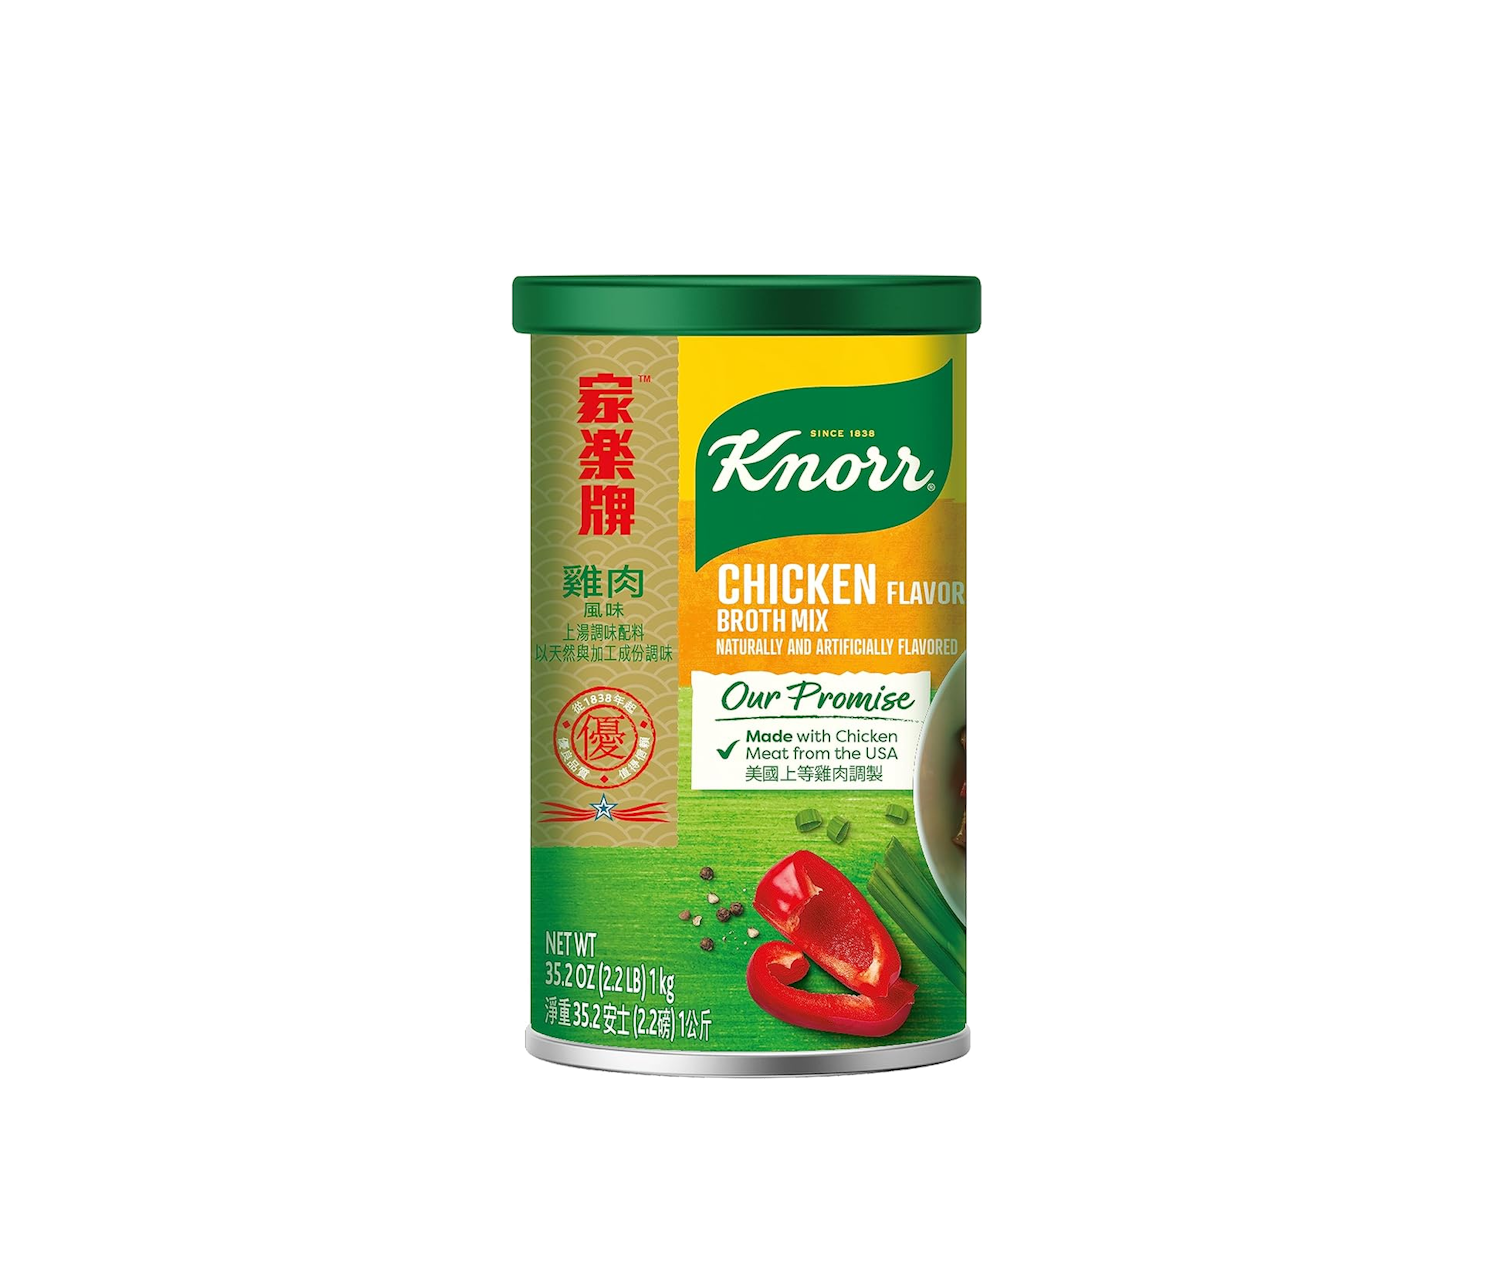 Knorr Chicken Broth Mix 2.2 lbs